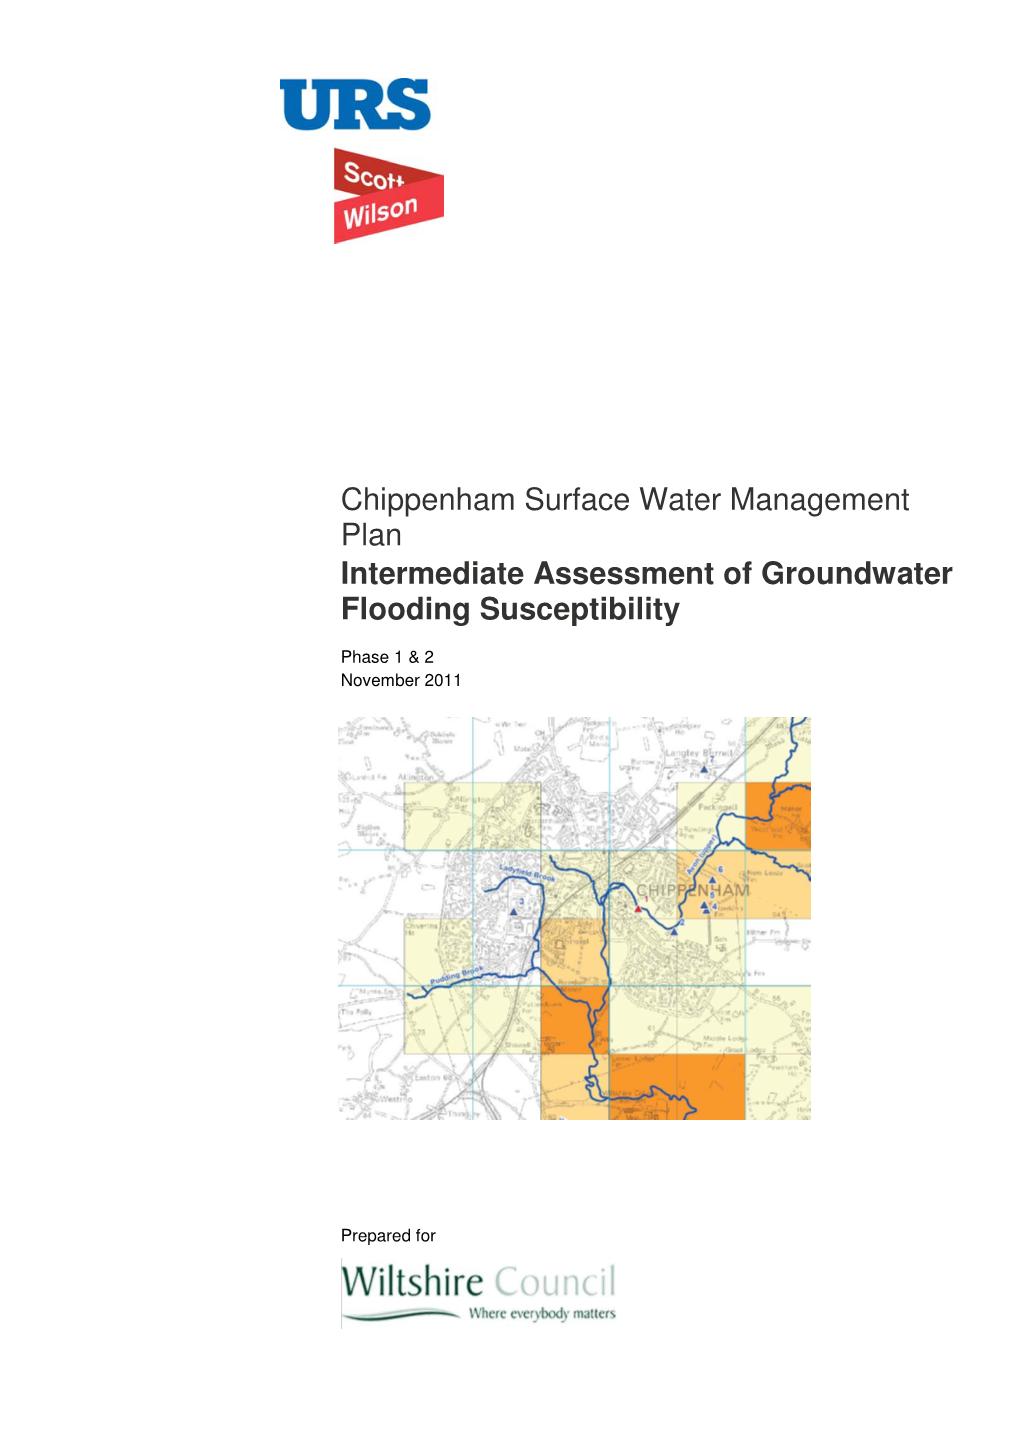 Chippenham Surface Water Management Plan Intermediate Assessment of Groundwater Flooding Susceptibility